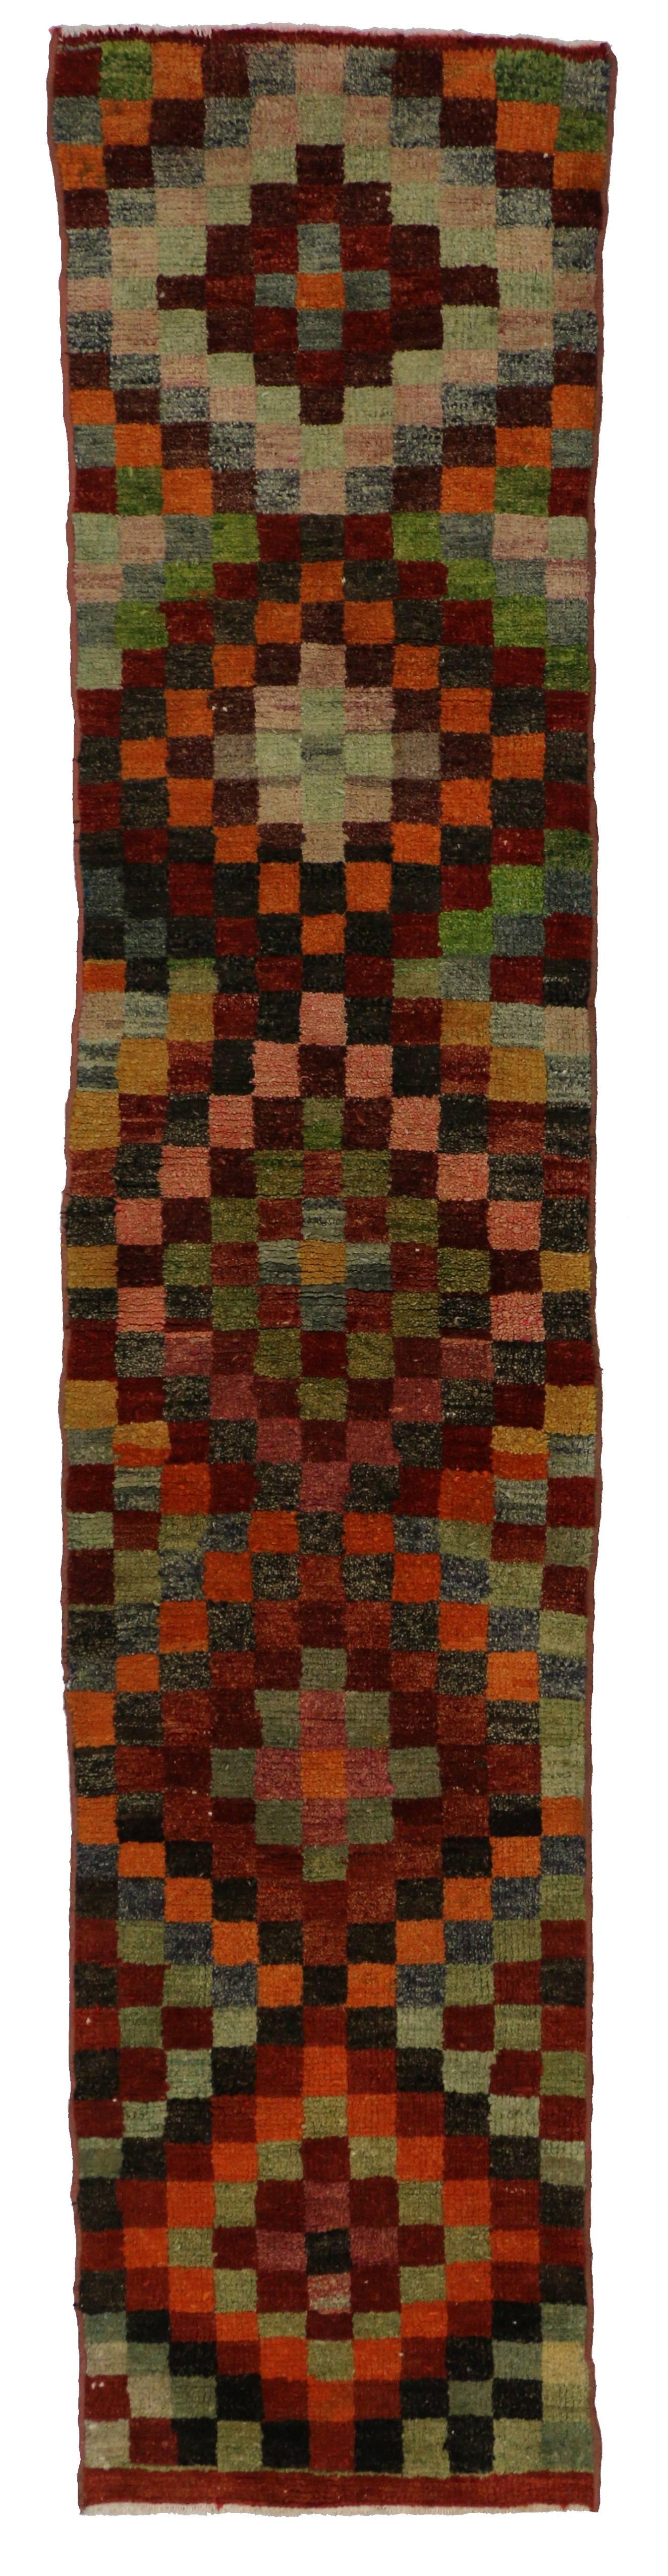 Vintage Turkish Oushak Runner with Checker Pattern and Bauhaus Cubism Style 1